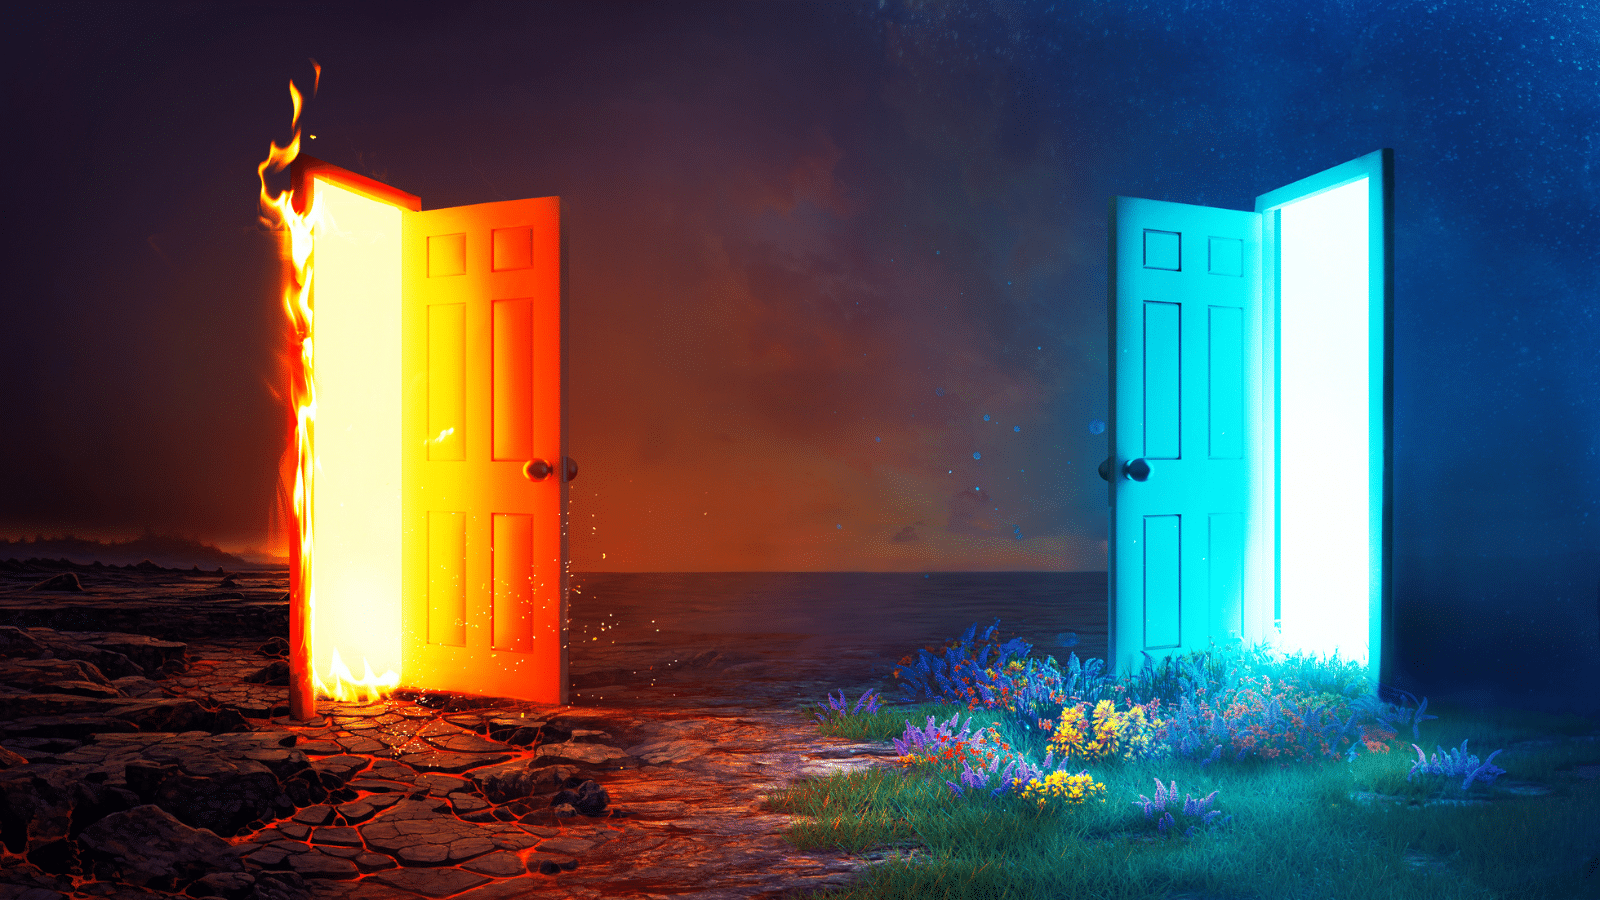 Picture of 2 doors with one open to fire and one showing blue with flowers around it